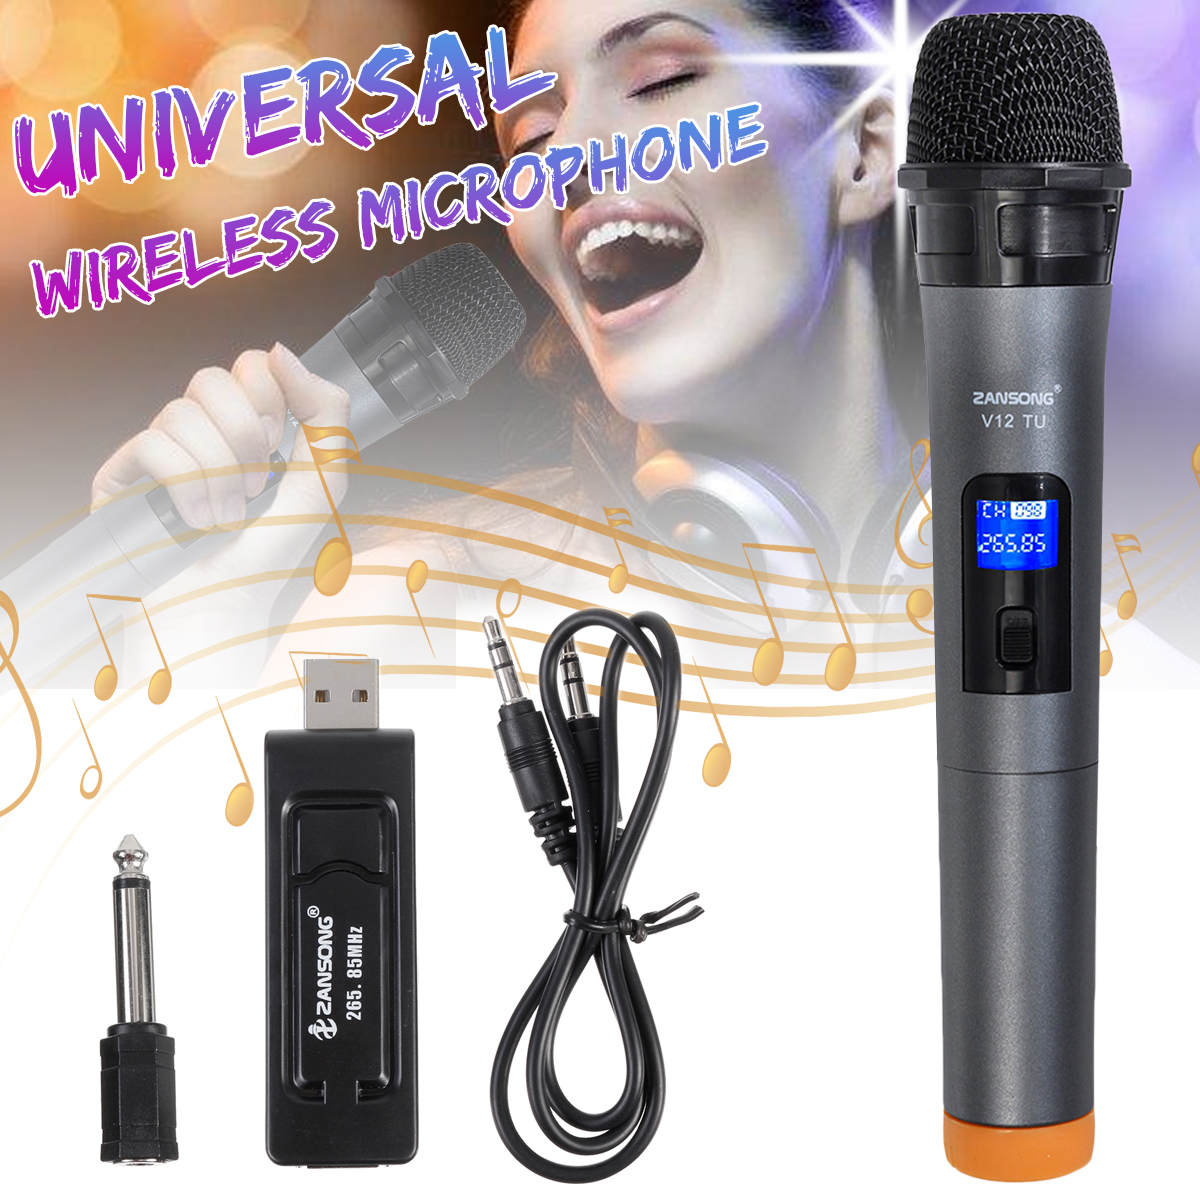 Professional-UHF-Wireless-Microphone-Handheld-Mic-System-Karaoke-With-Receiver-and-Display-Screen-1594315-1